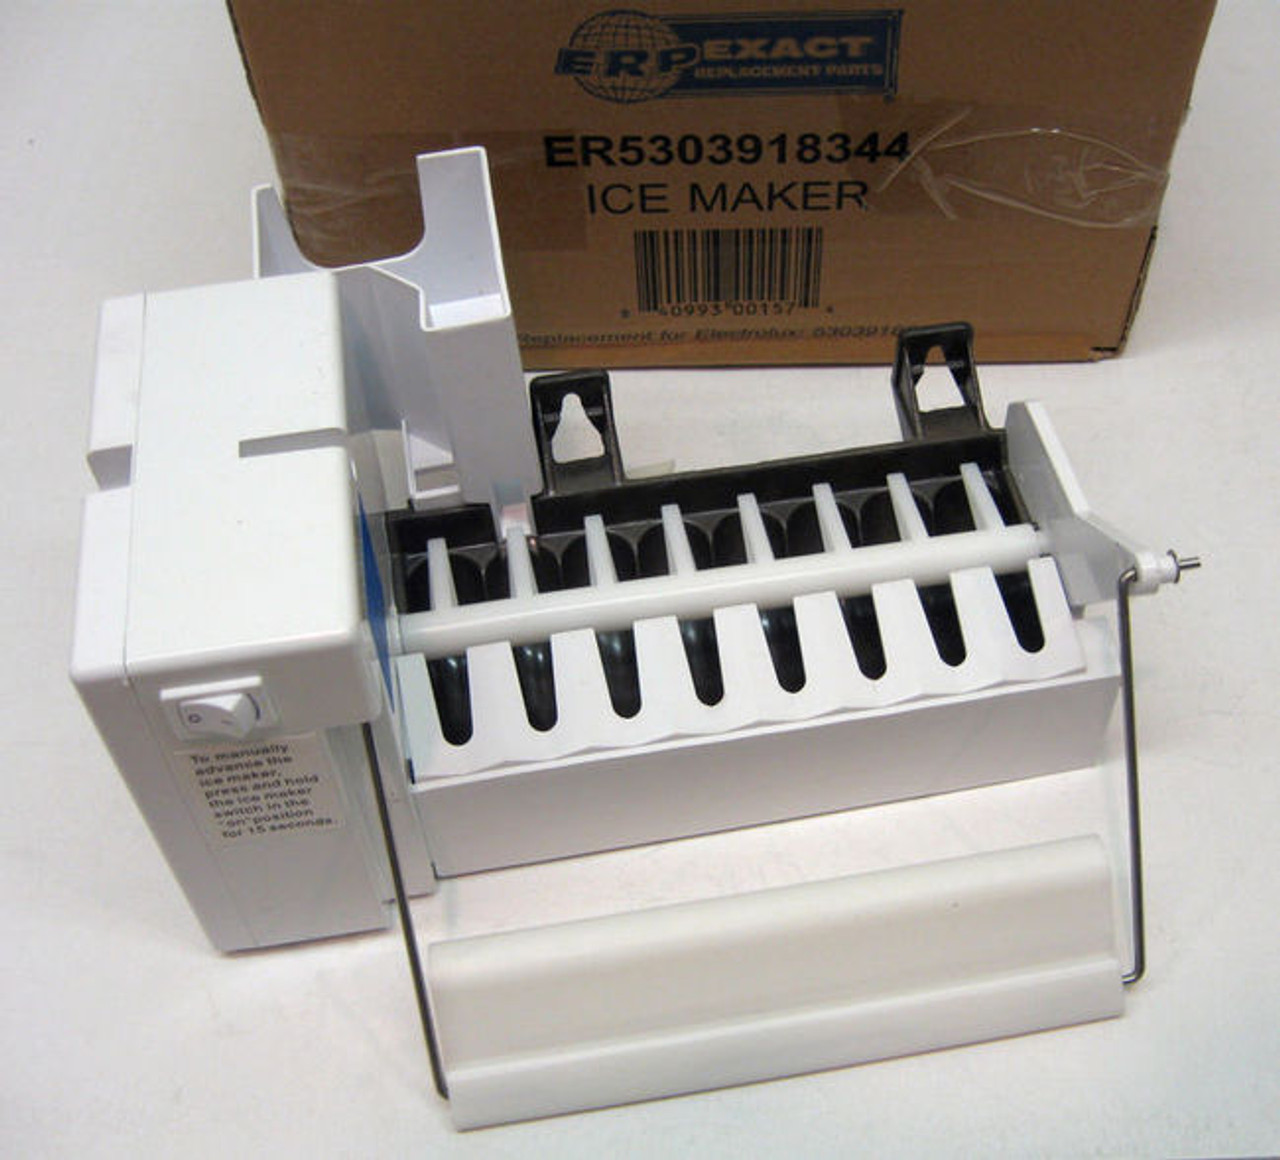 Refrigerator Icemaker for Electrolux| McCombs Supply Co |5303918344